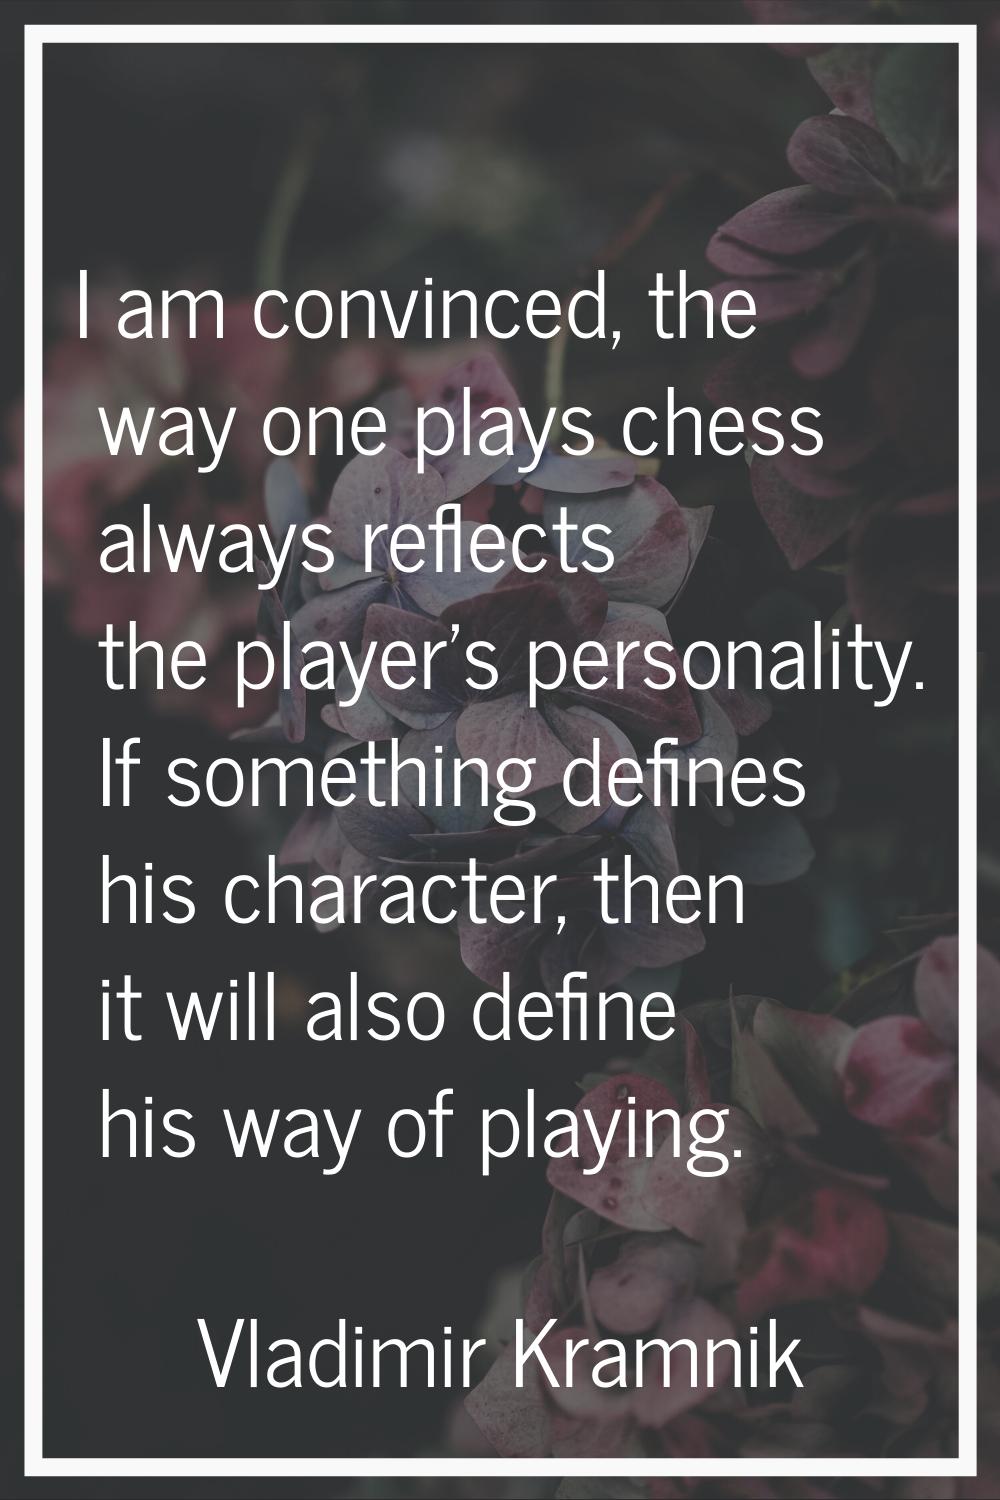 I am convinced, the way one plays chess always reflects the player's personality. If something defi